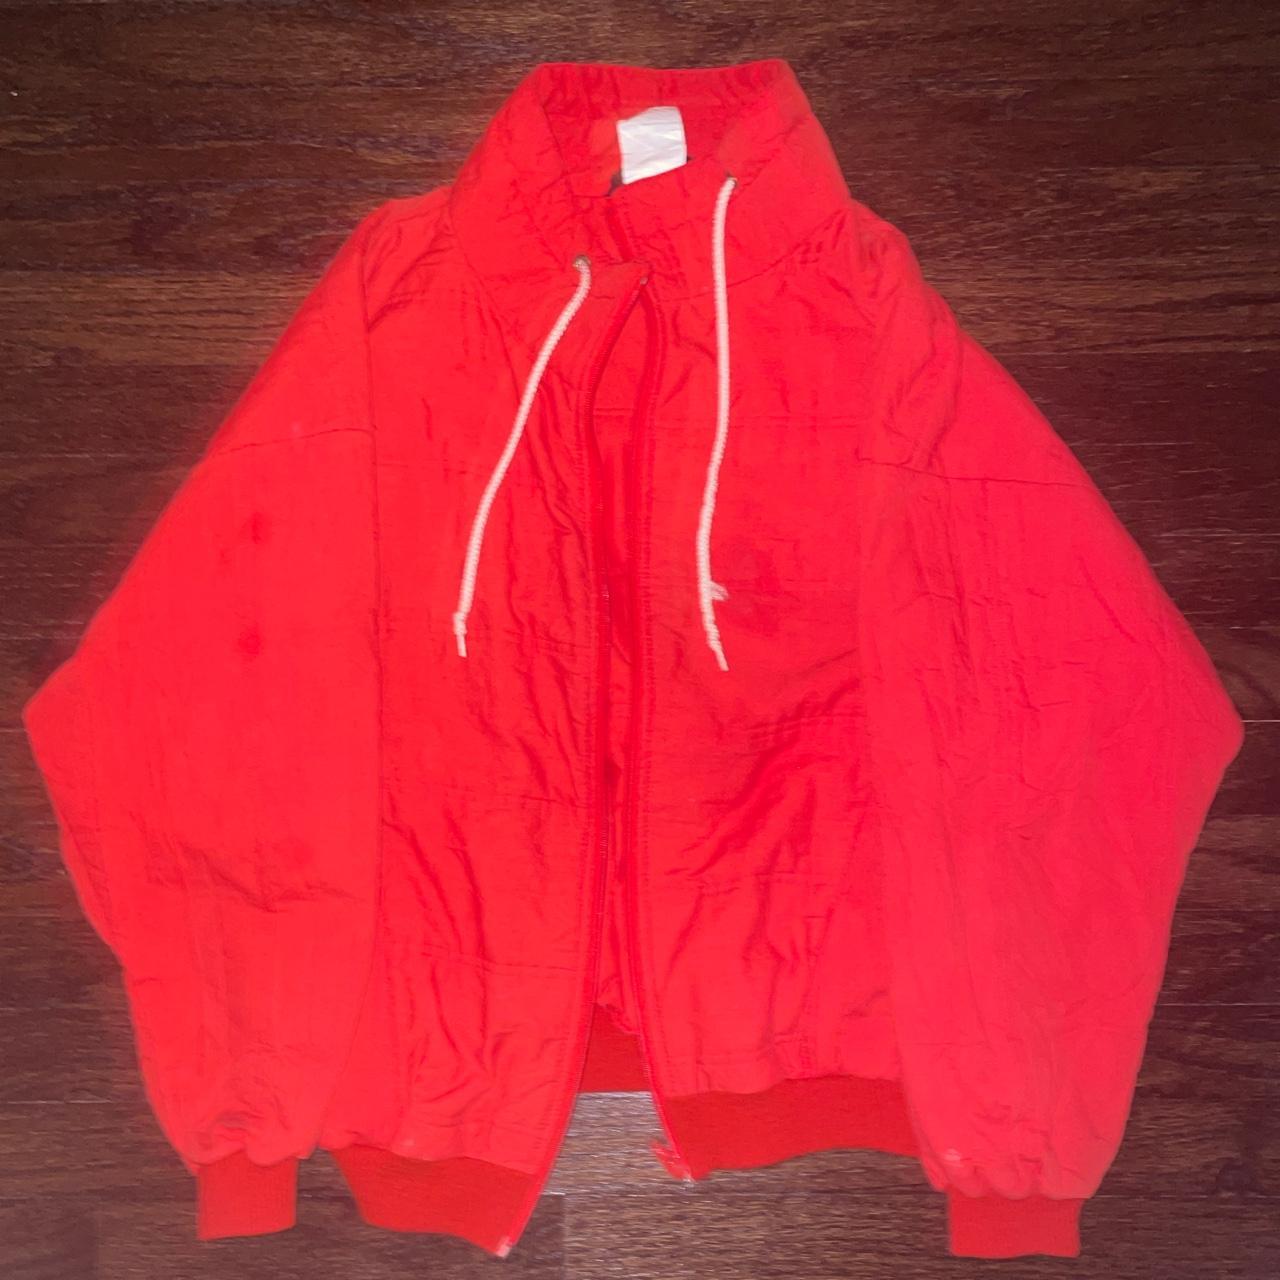 Product Image 1 - Red collared jacket
Semi-puffy, tapered sleeves